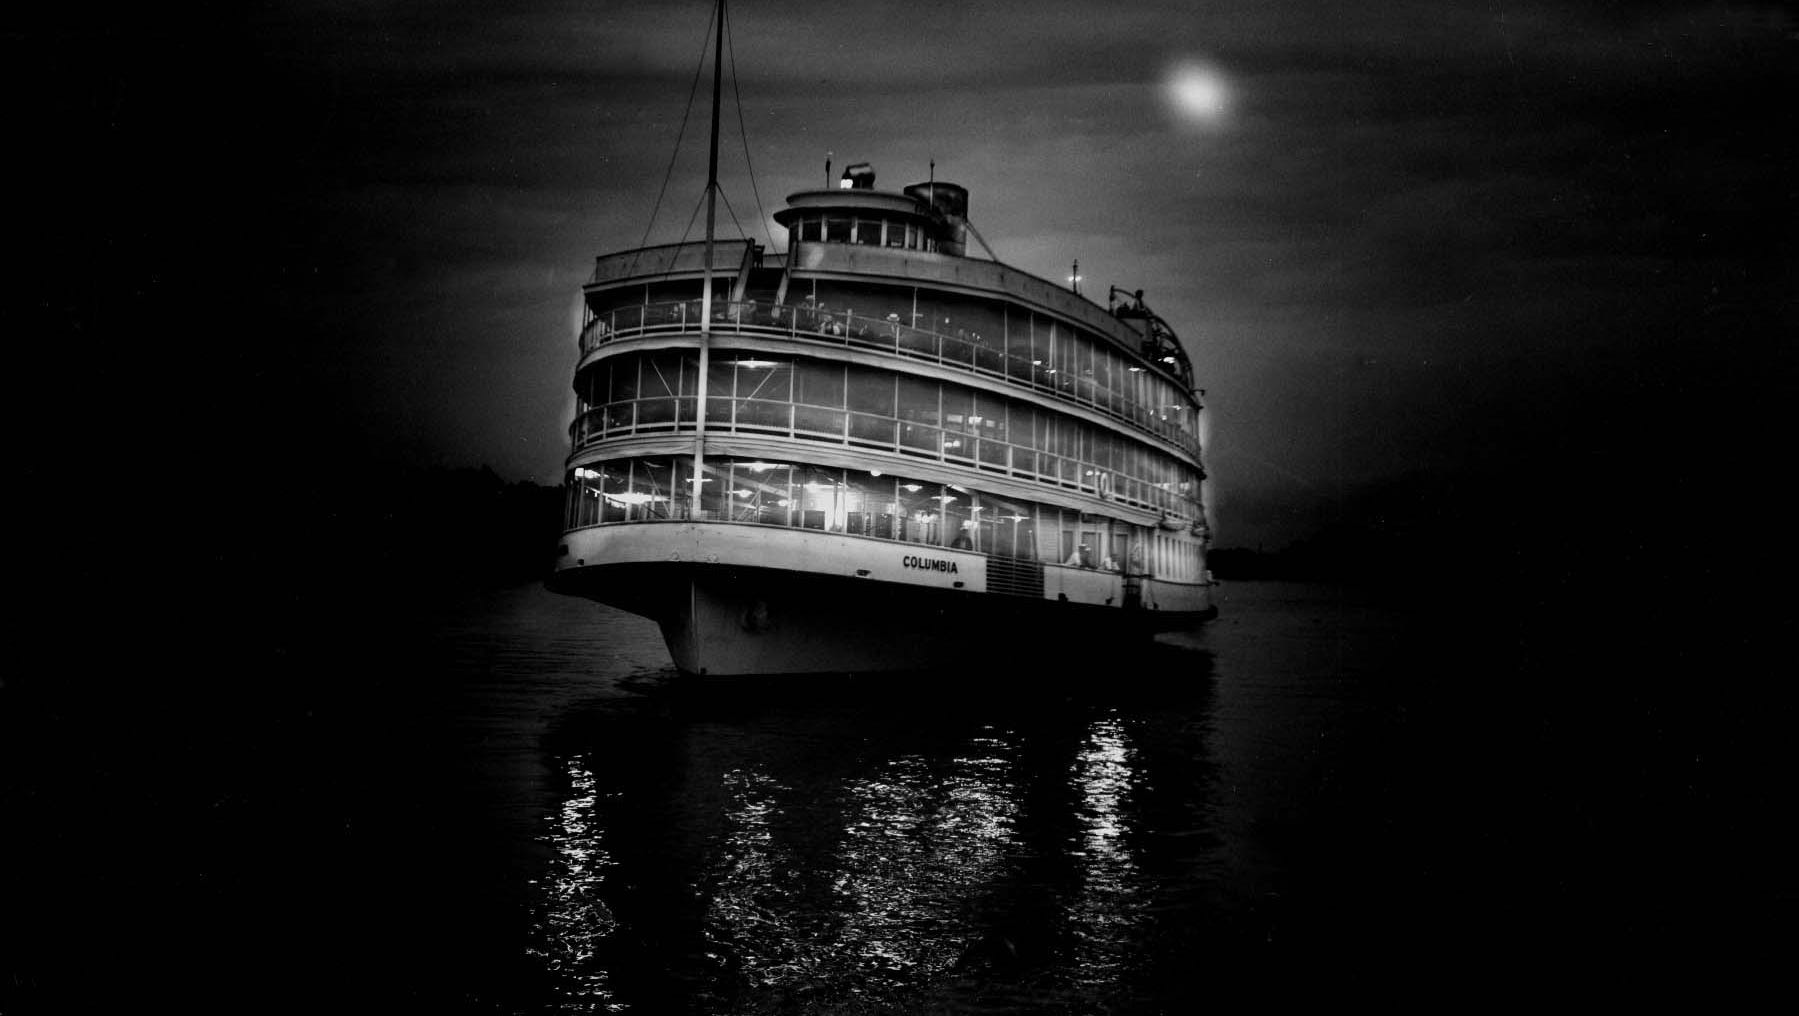 The Columbia sails on a moonlit night on Aug. 15, 1940. A great part of the romance of the island lay in getting there. The trip took just over an hour, and there were moonlight cruises as well as daytime ferries.